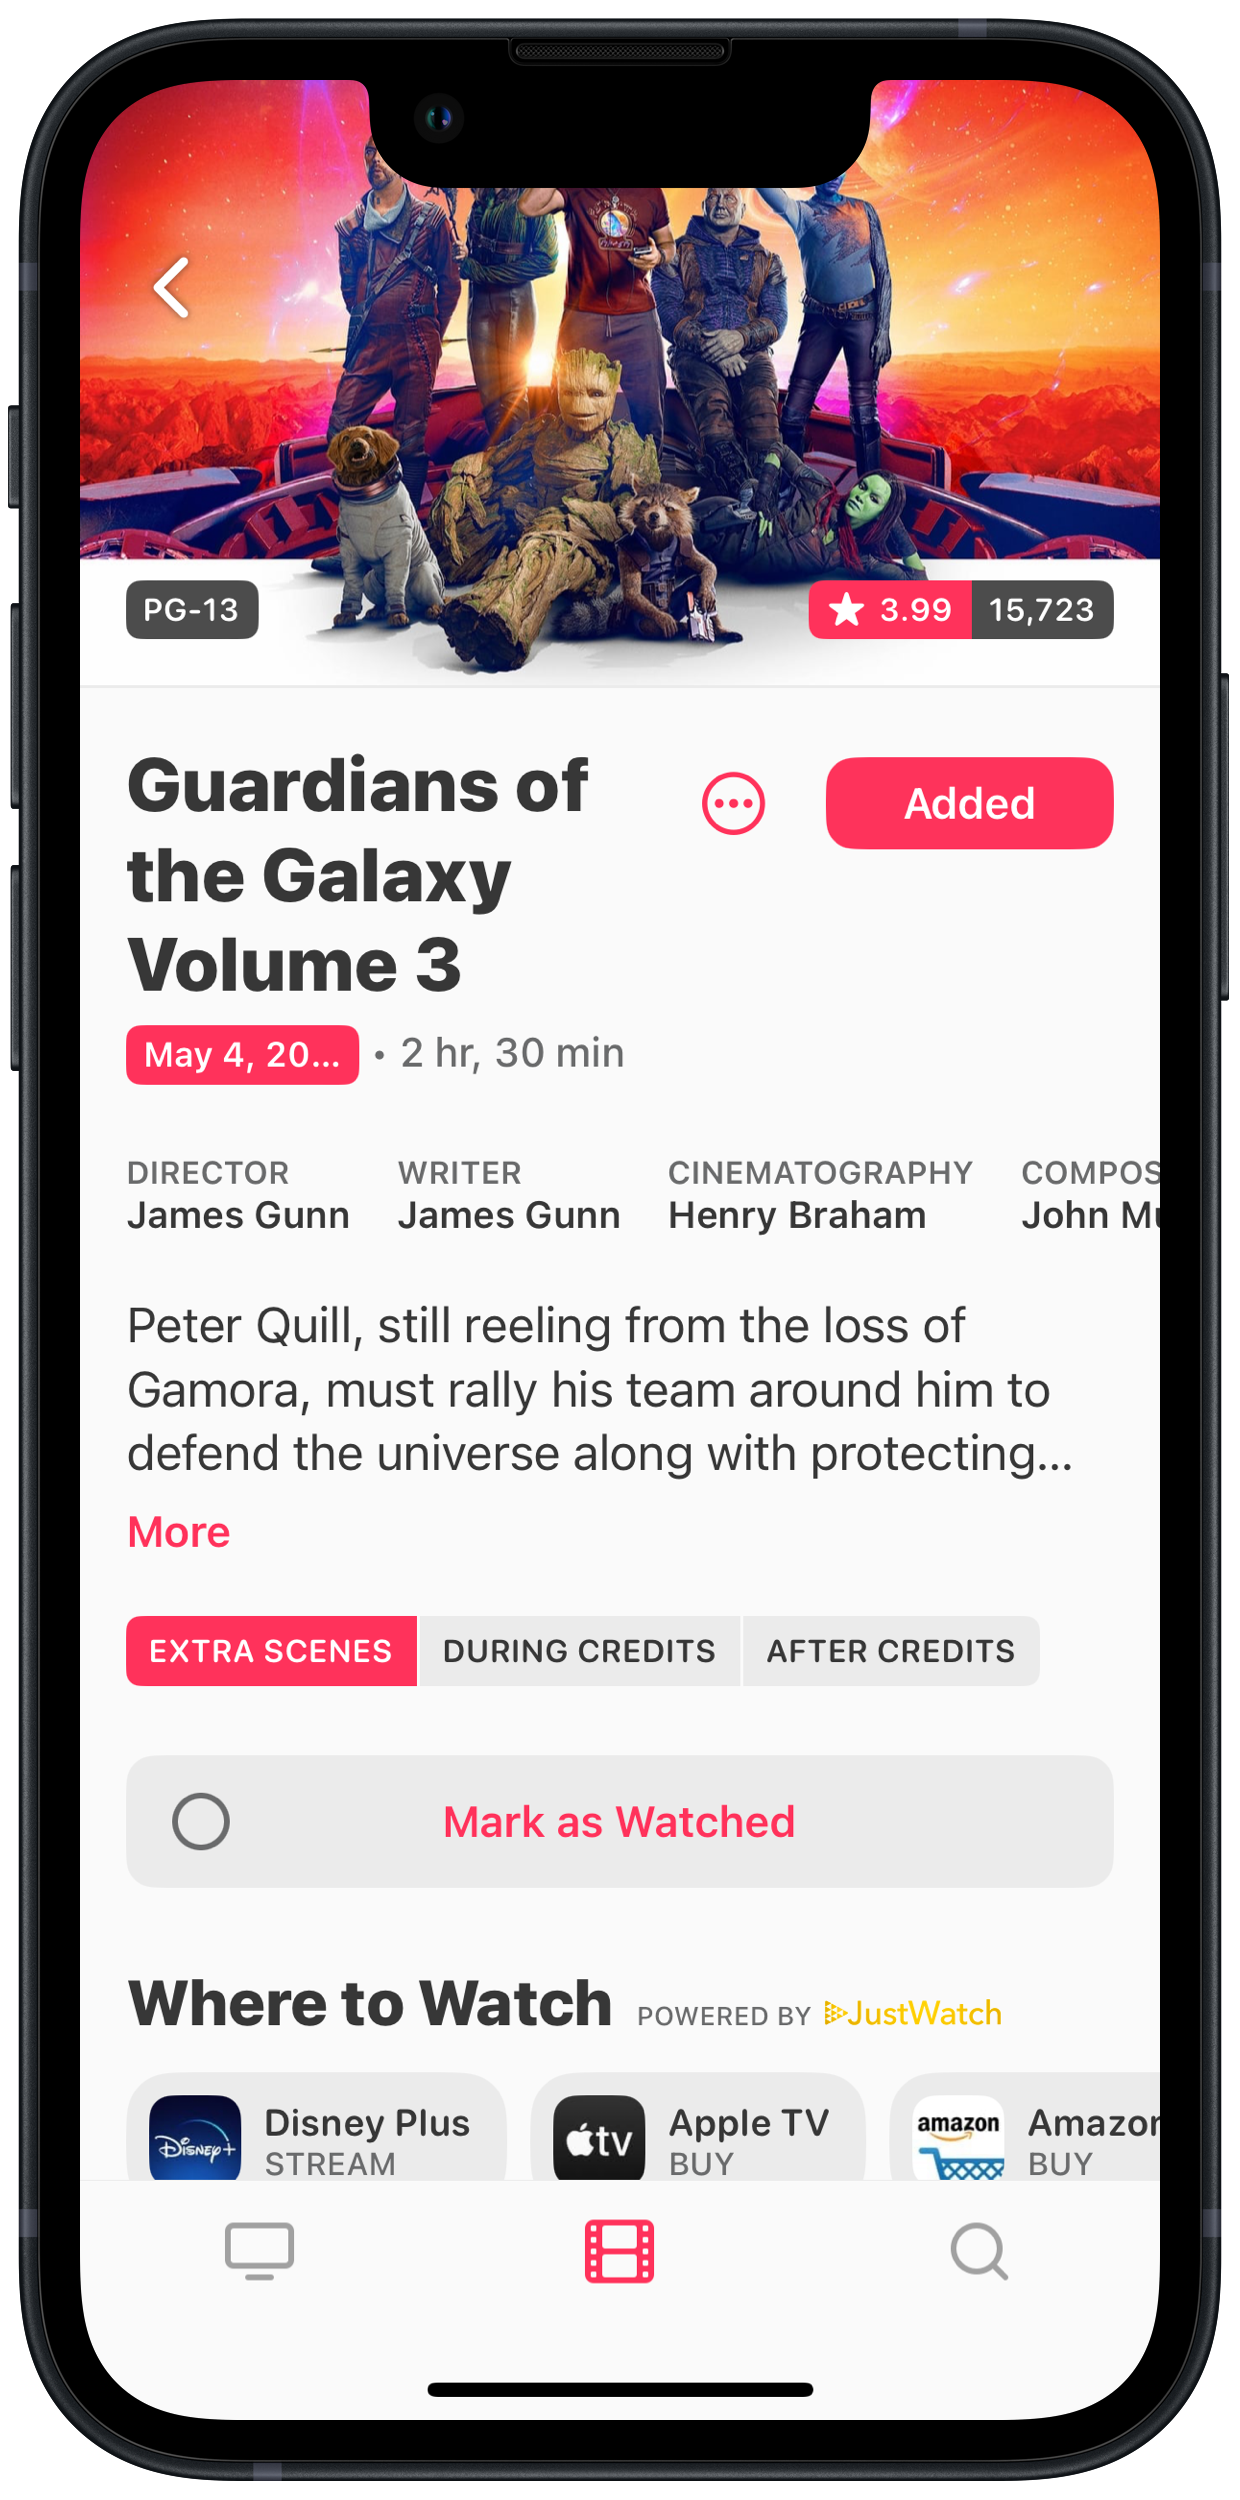 A smartphone screen displays a TV Forecast’s listing for &ldquo;Guardians of the Galaxy Volume 3&rdquo; with a colorful group of characters, and details about the film below including the release date, rating, and viewing platforms.